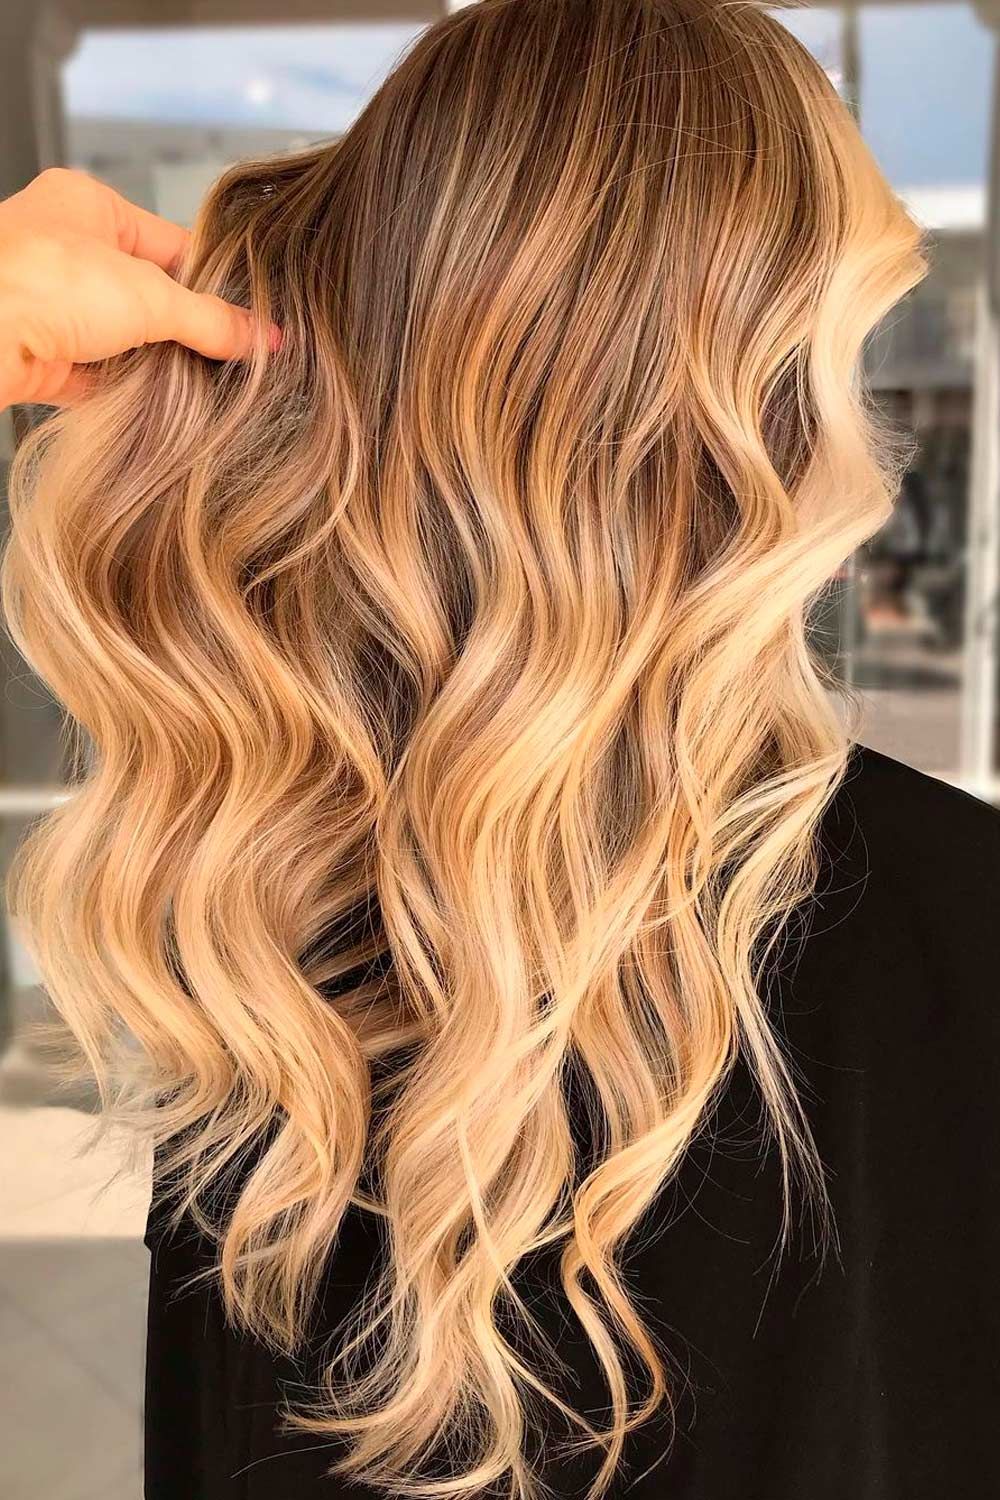 Dirty Blonde Ombre Hair With Long Layers